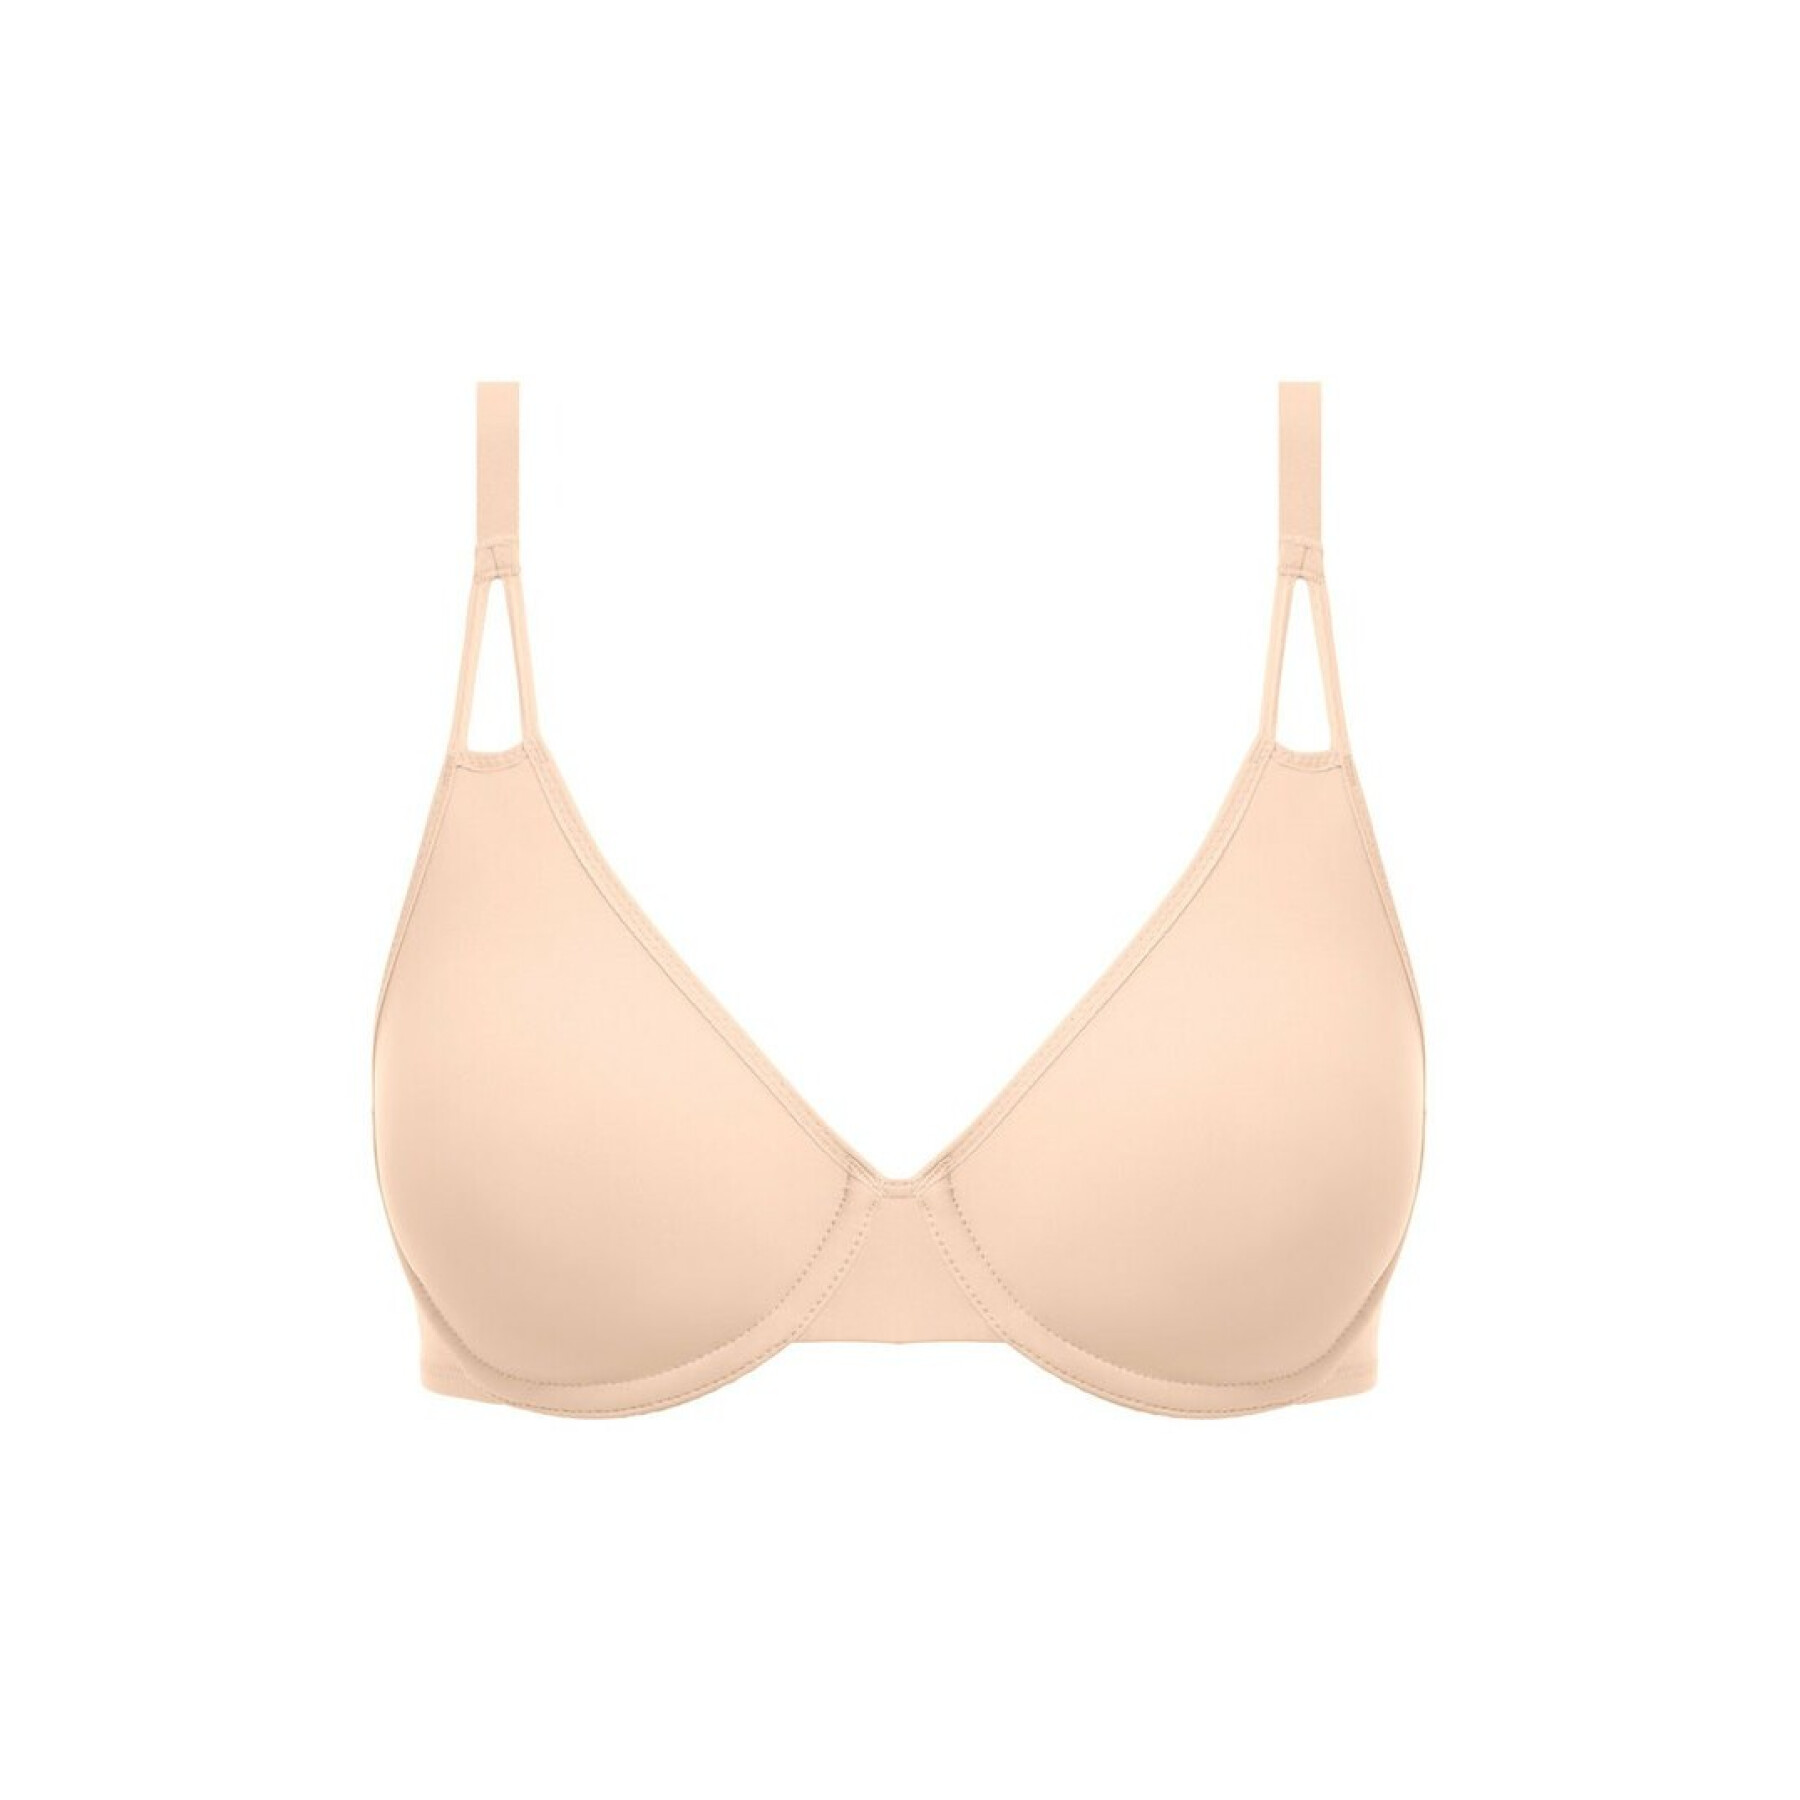 Women's non-padded underwired molded bra Wacoal Accord